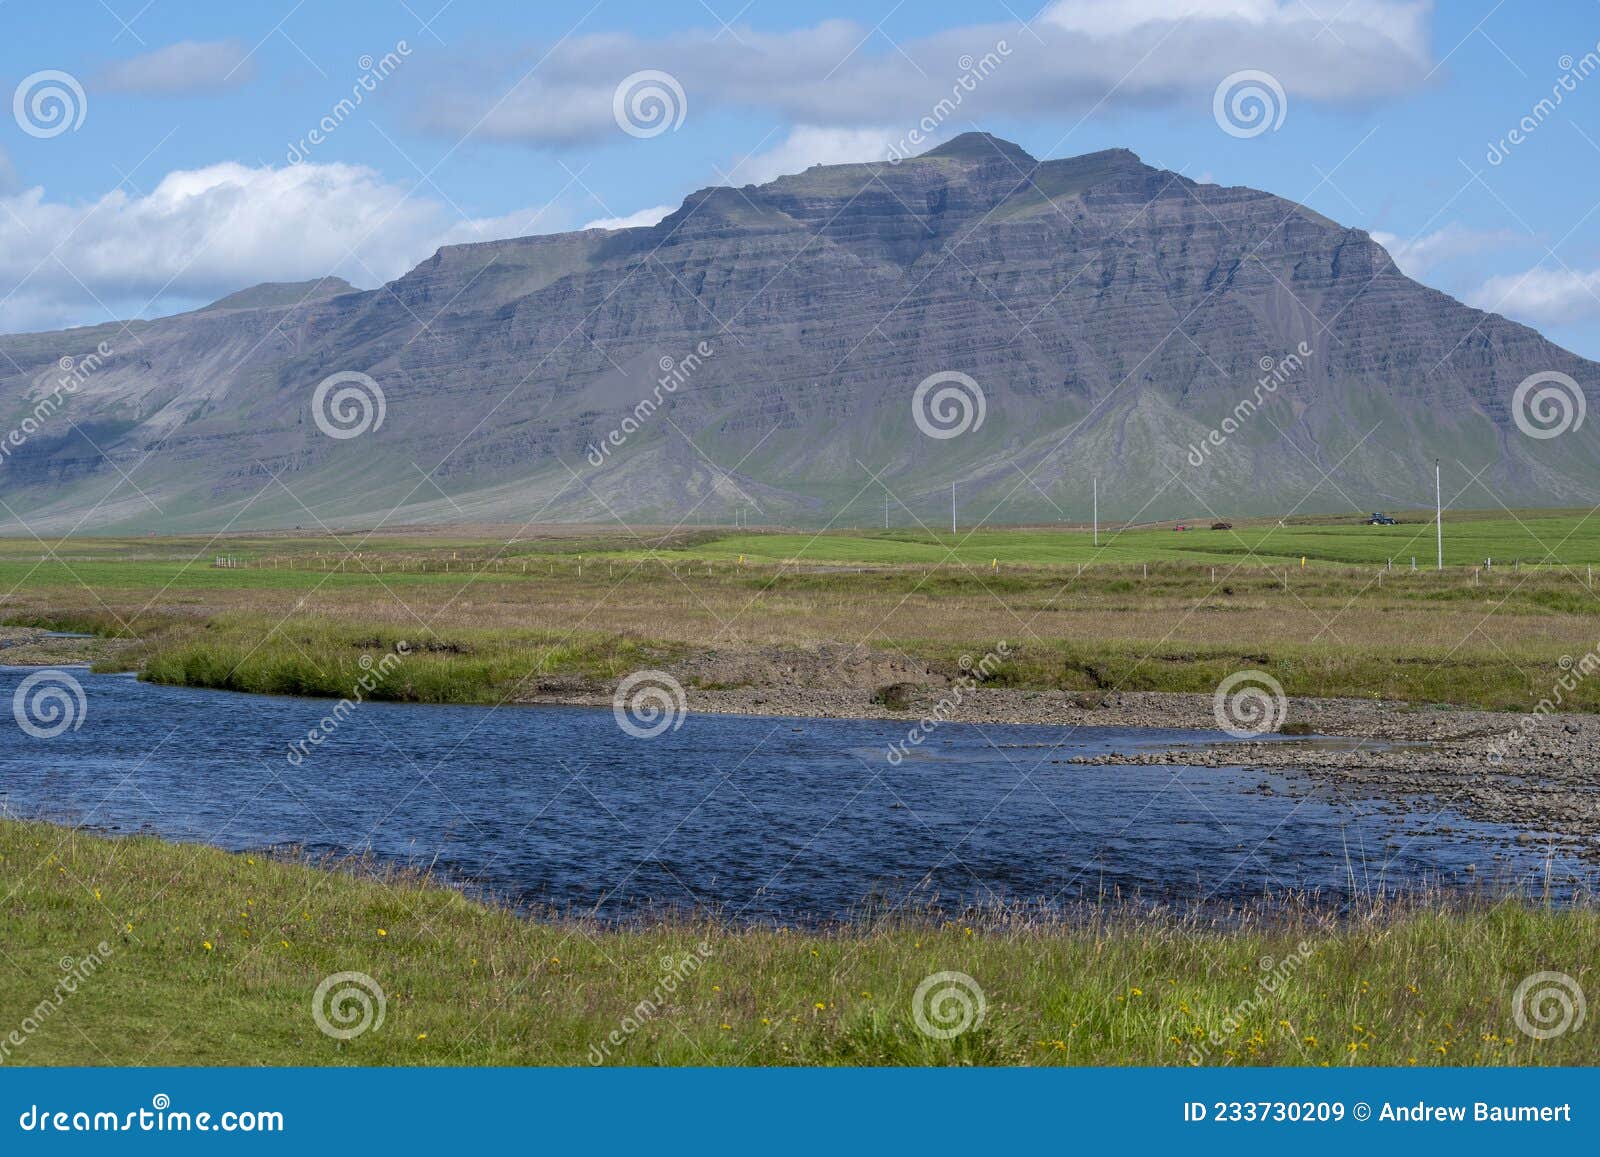 landscape of mountains and river in snaefellsnes peninsula south iceland